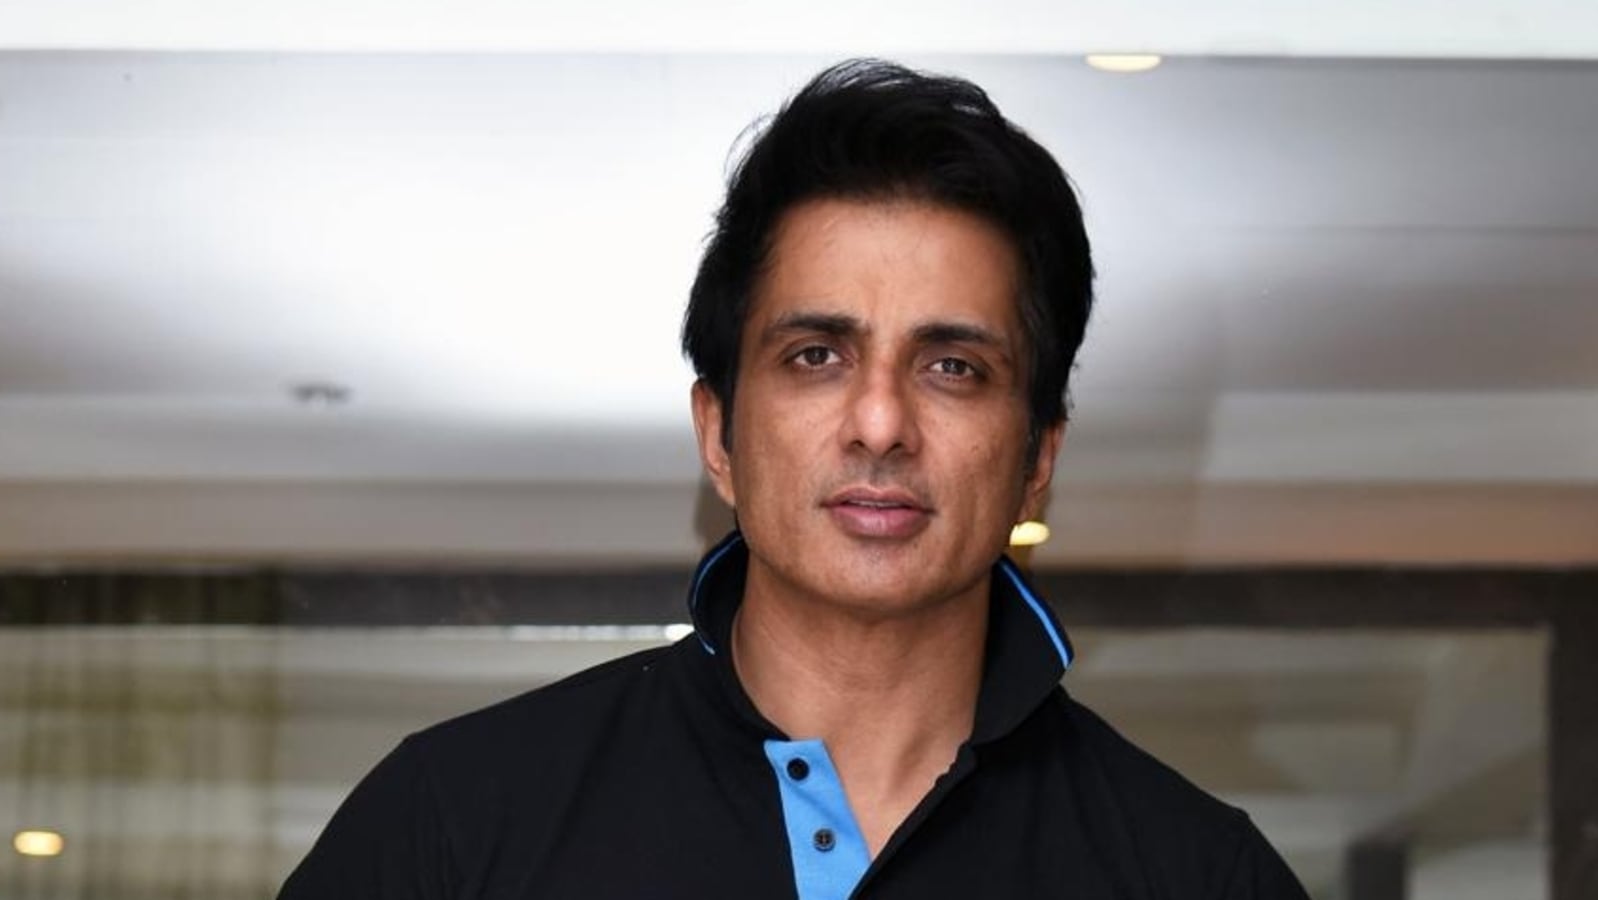 Fan wants Sonu Sood to distribute chilled beer this summer, actor asks if he’d like ‘bhujia’ with it